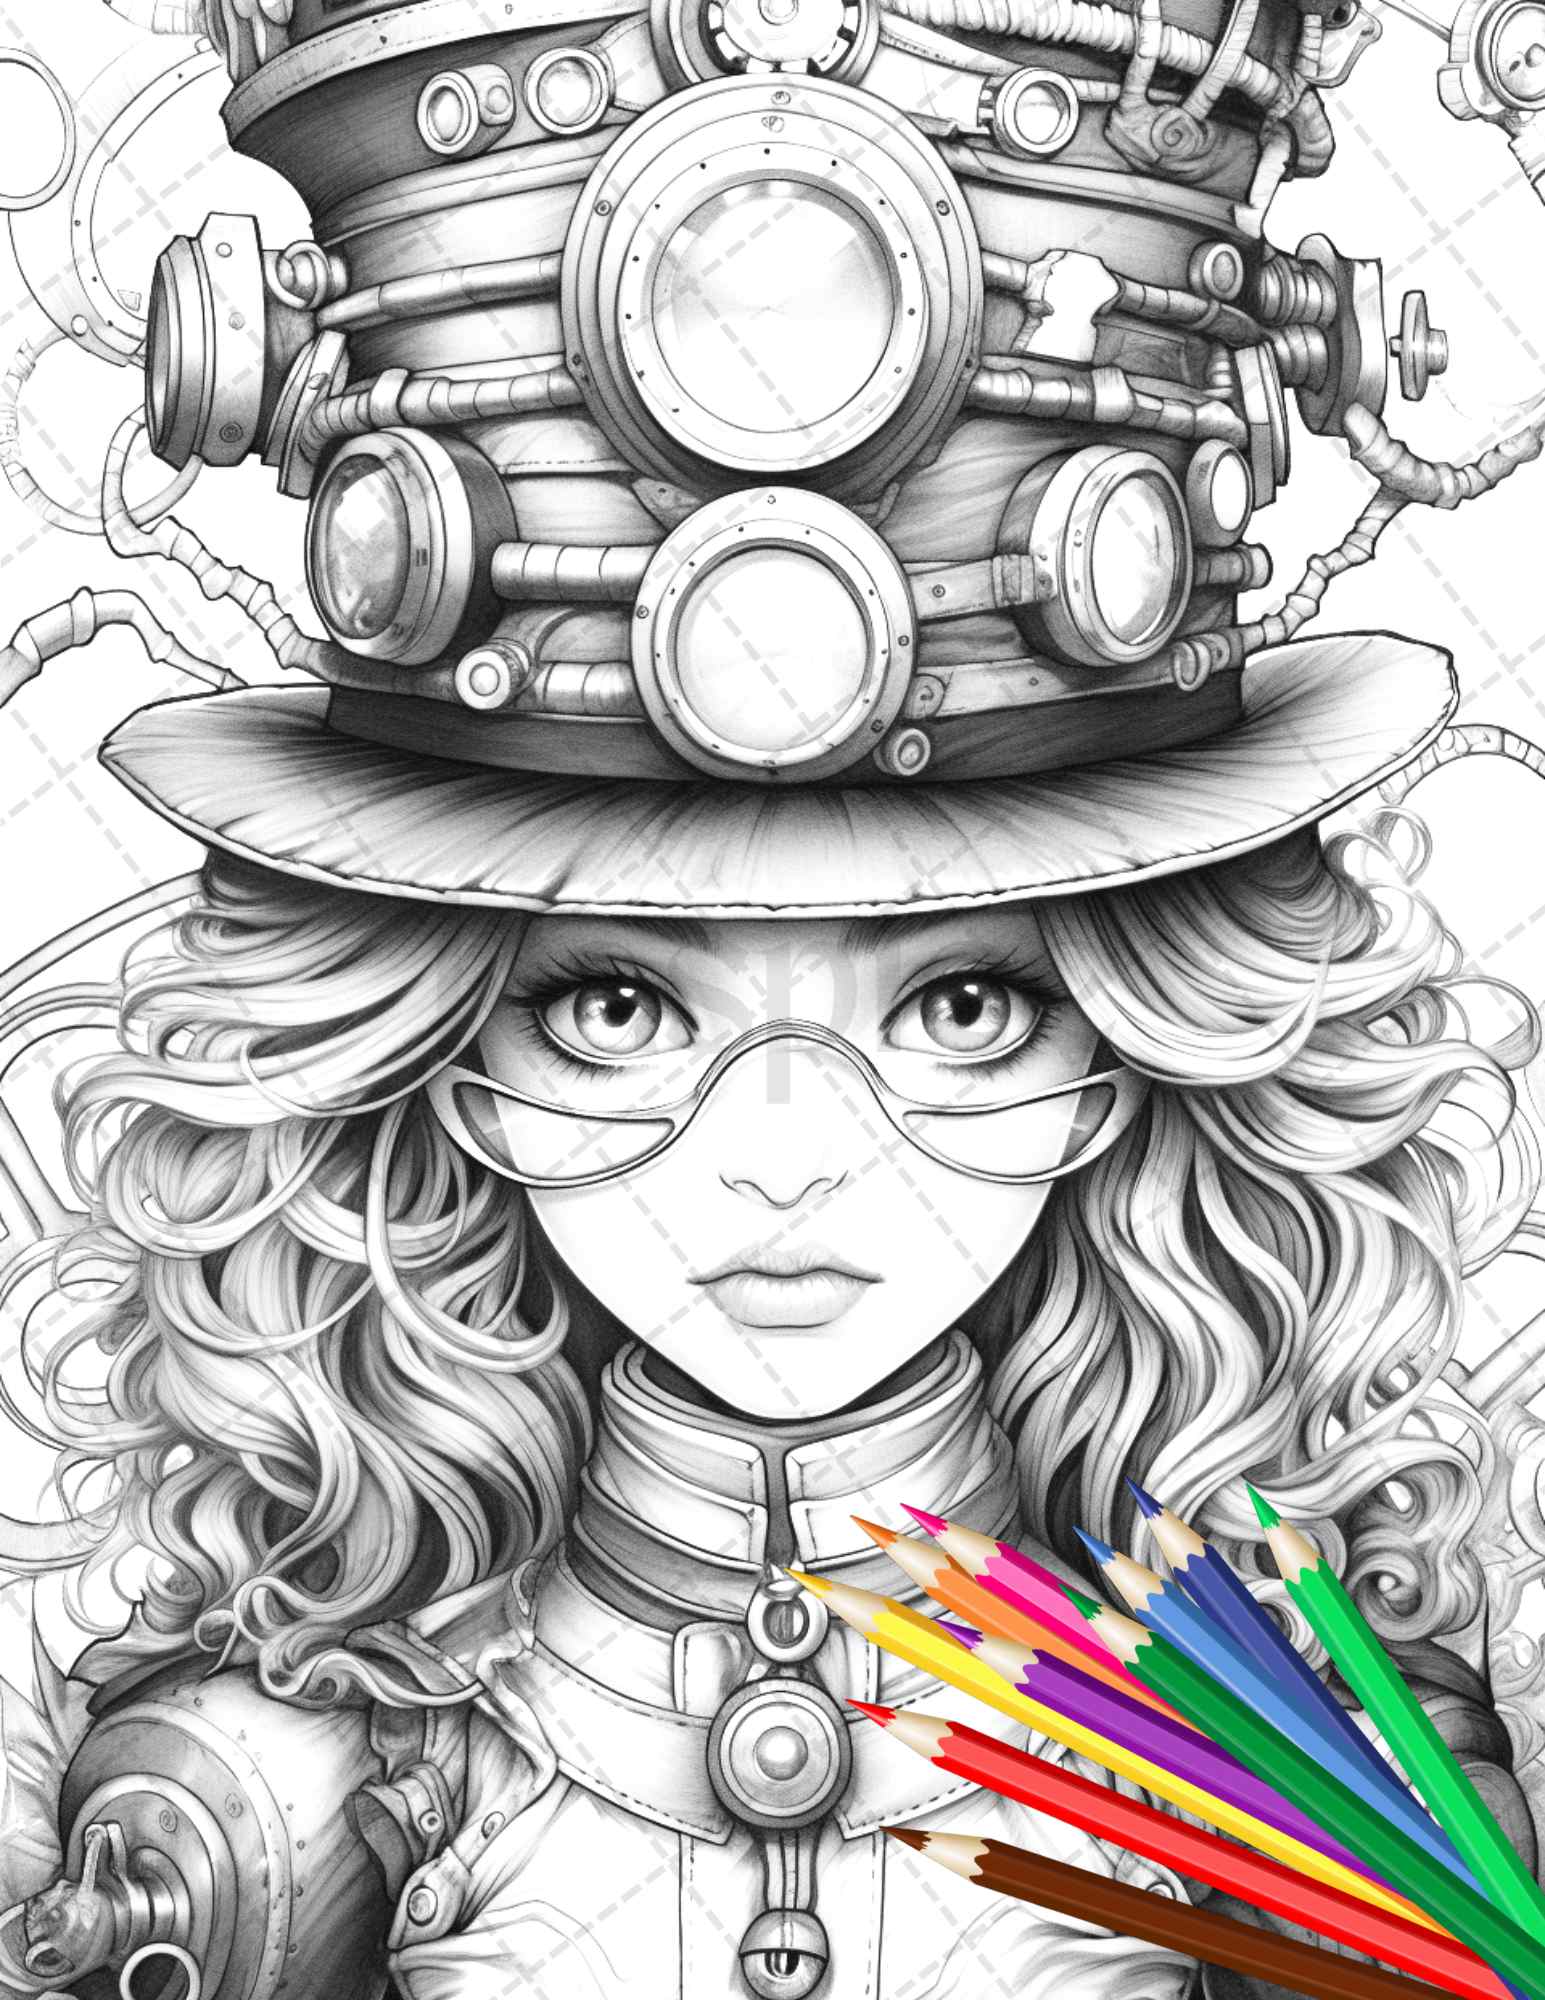 Steampunk coloring page for adults  Steampunk coloring, Coloring book art,  Cute coloring pages